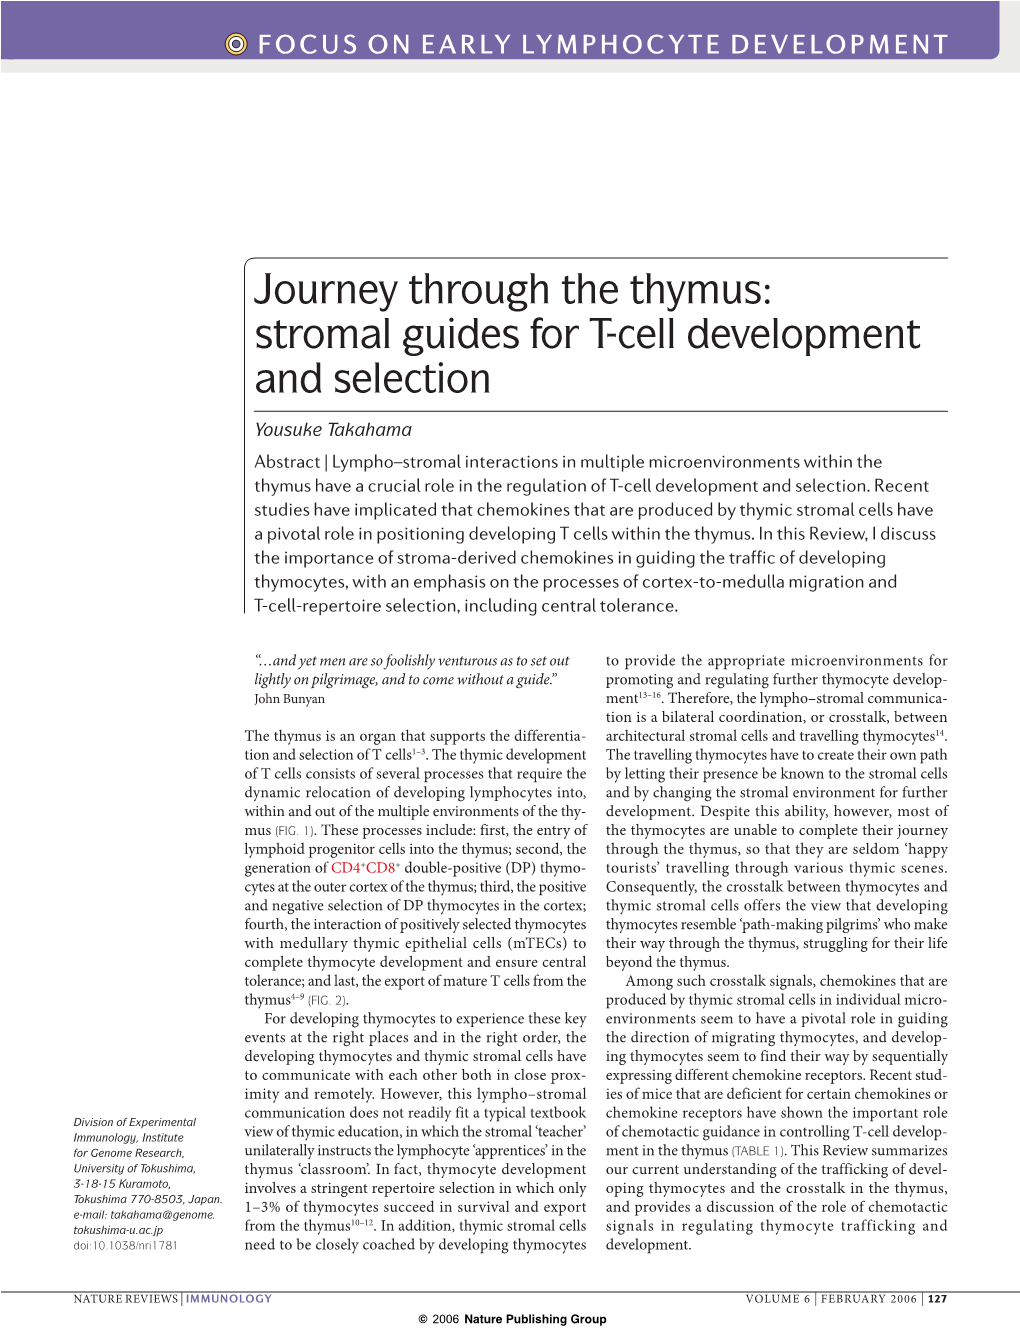 Journey Through the Thymus: Stromal Guides for T-Cell Development and Selection